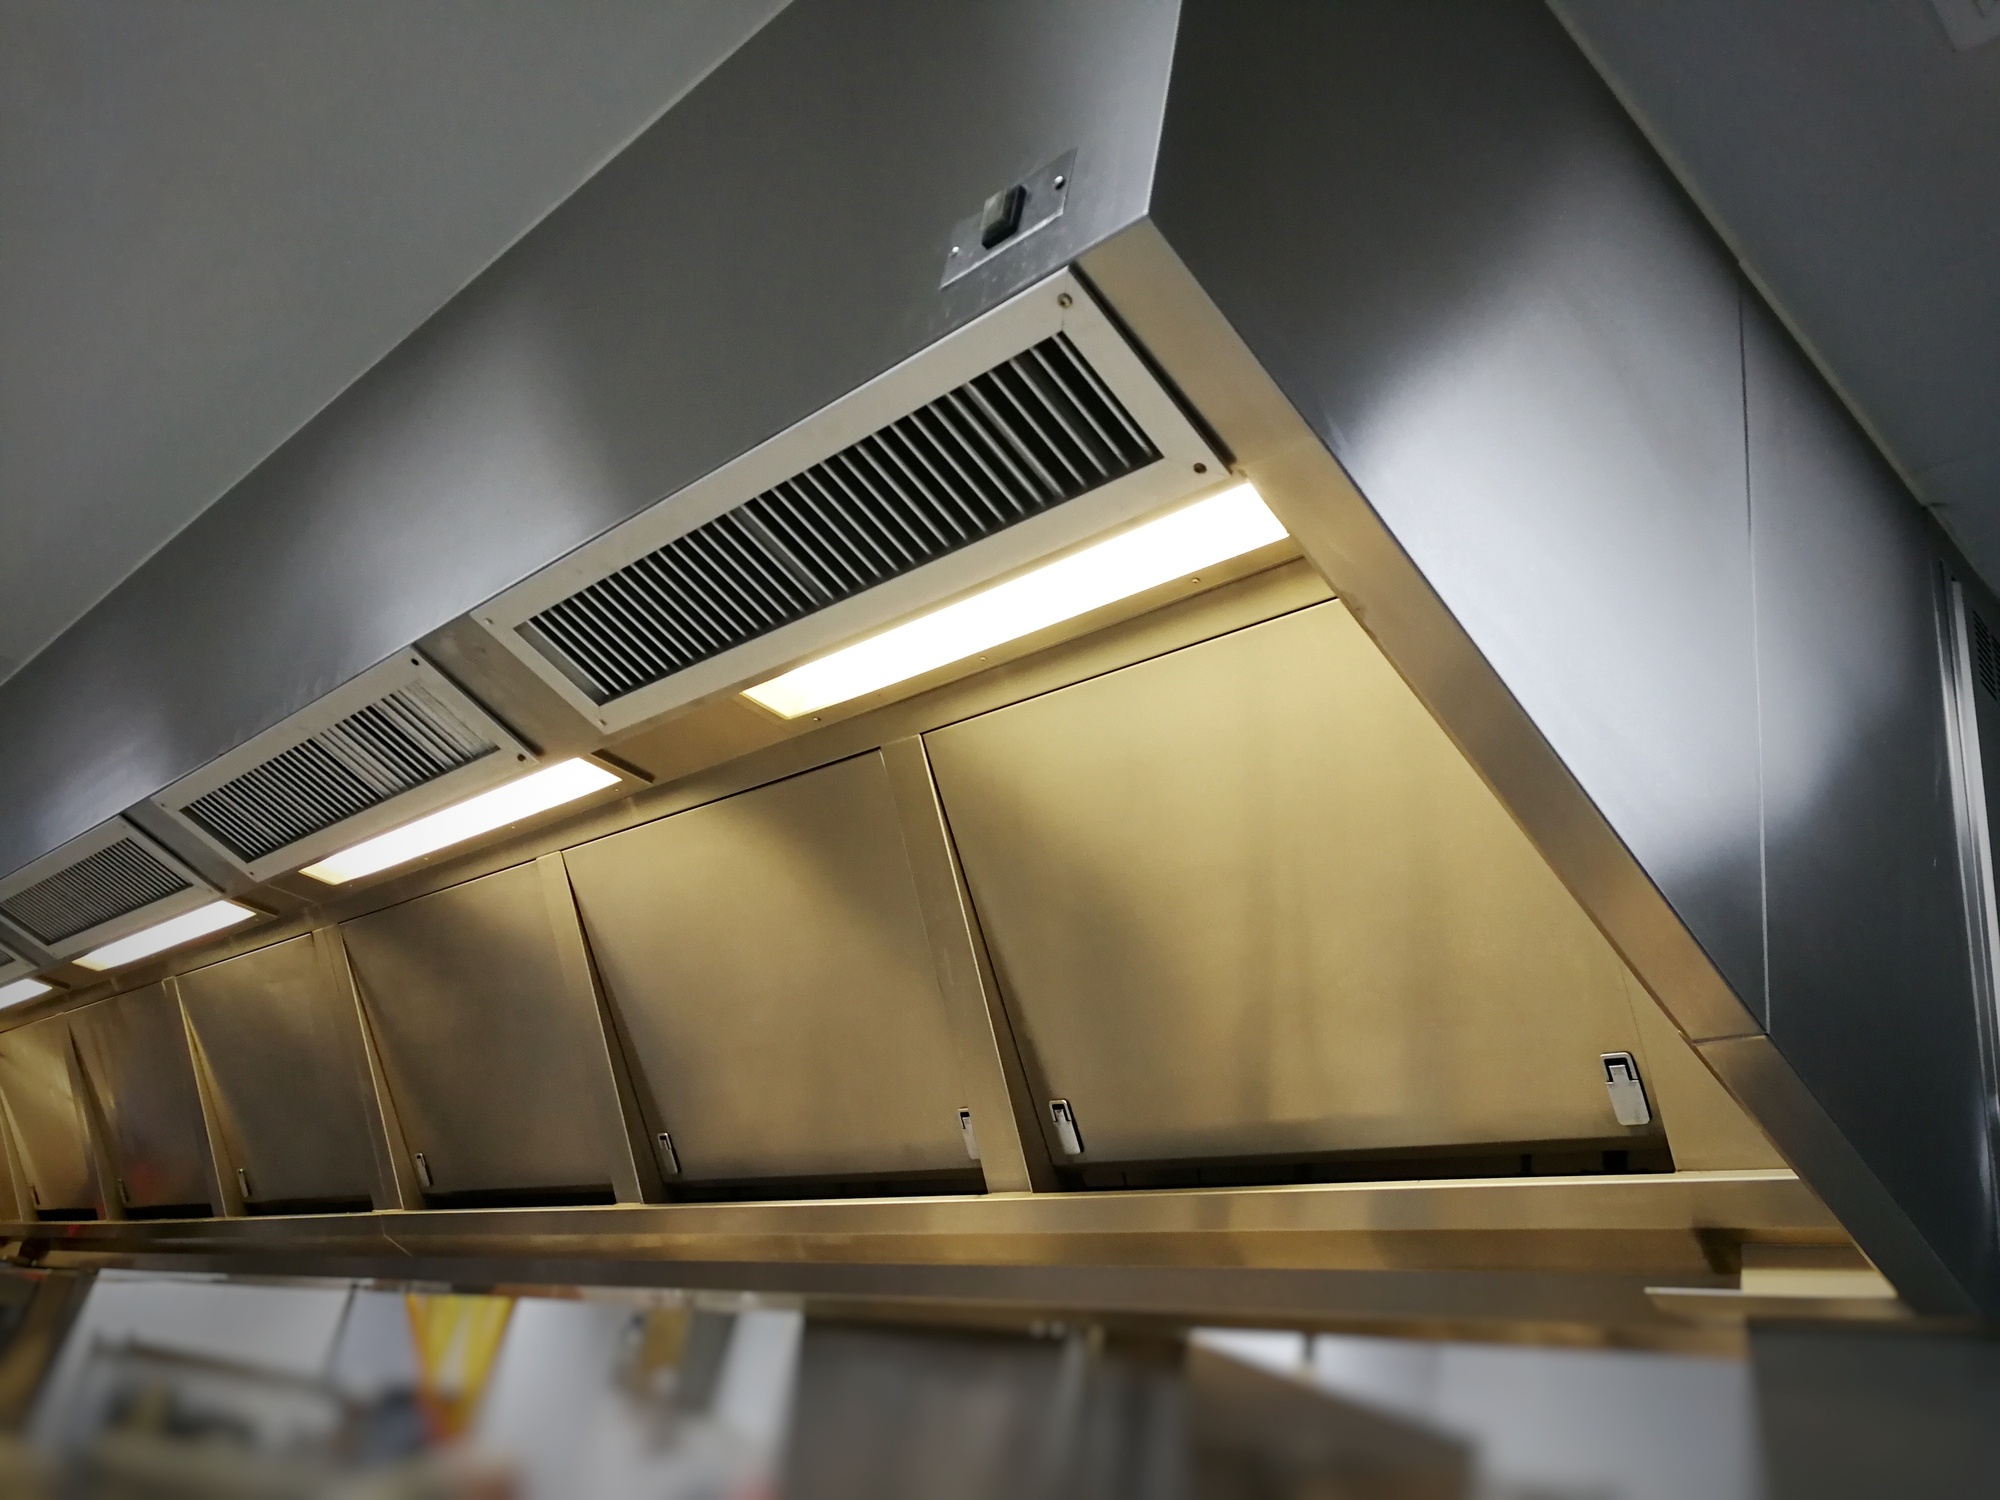 A commercial kitchen ventilation system fabricated by Cadexair.